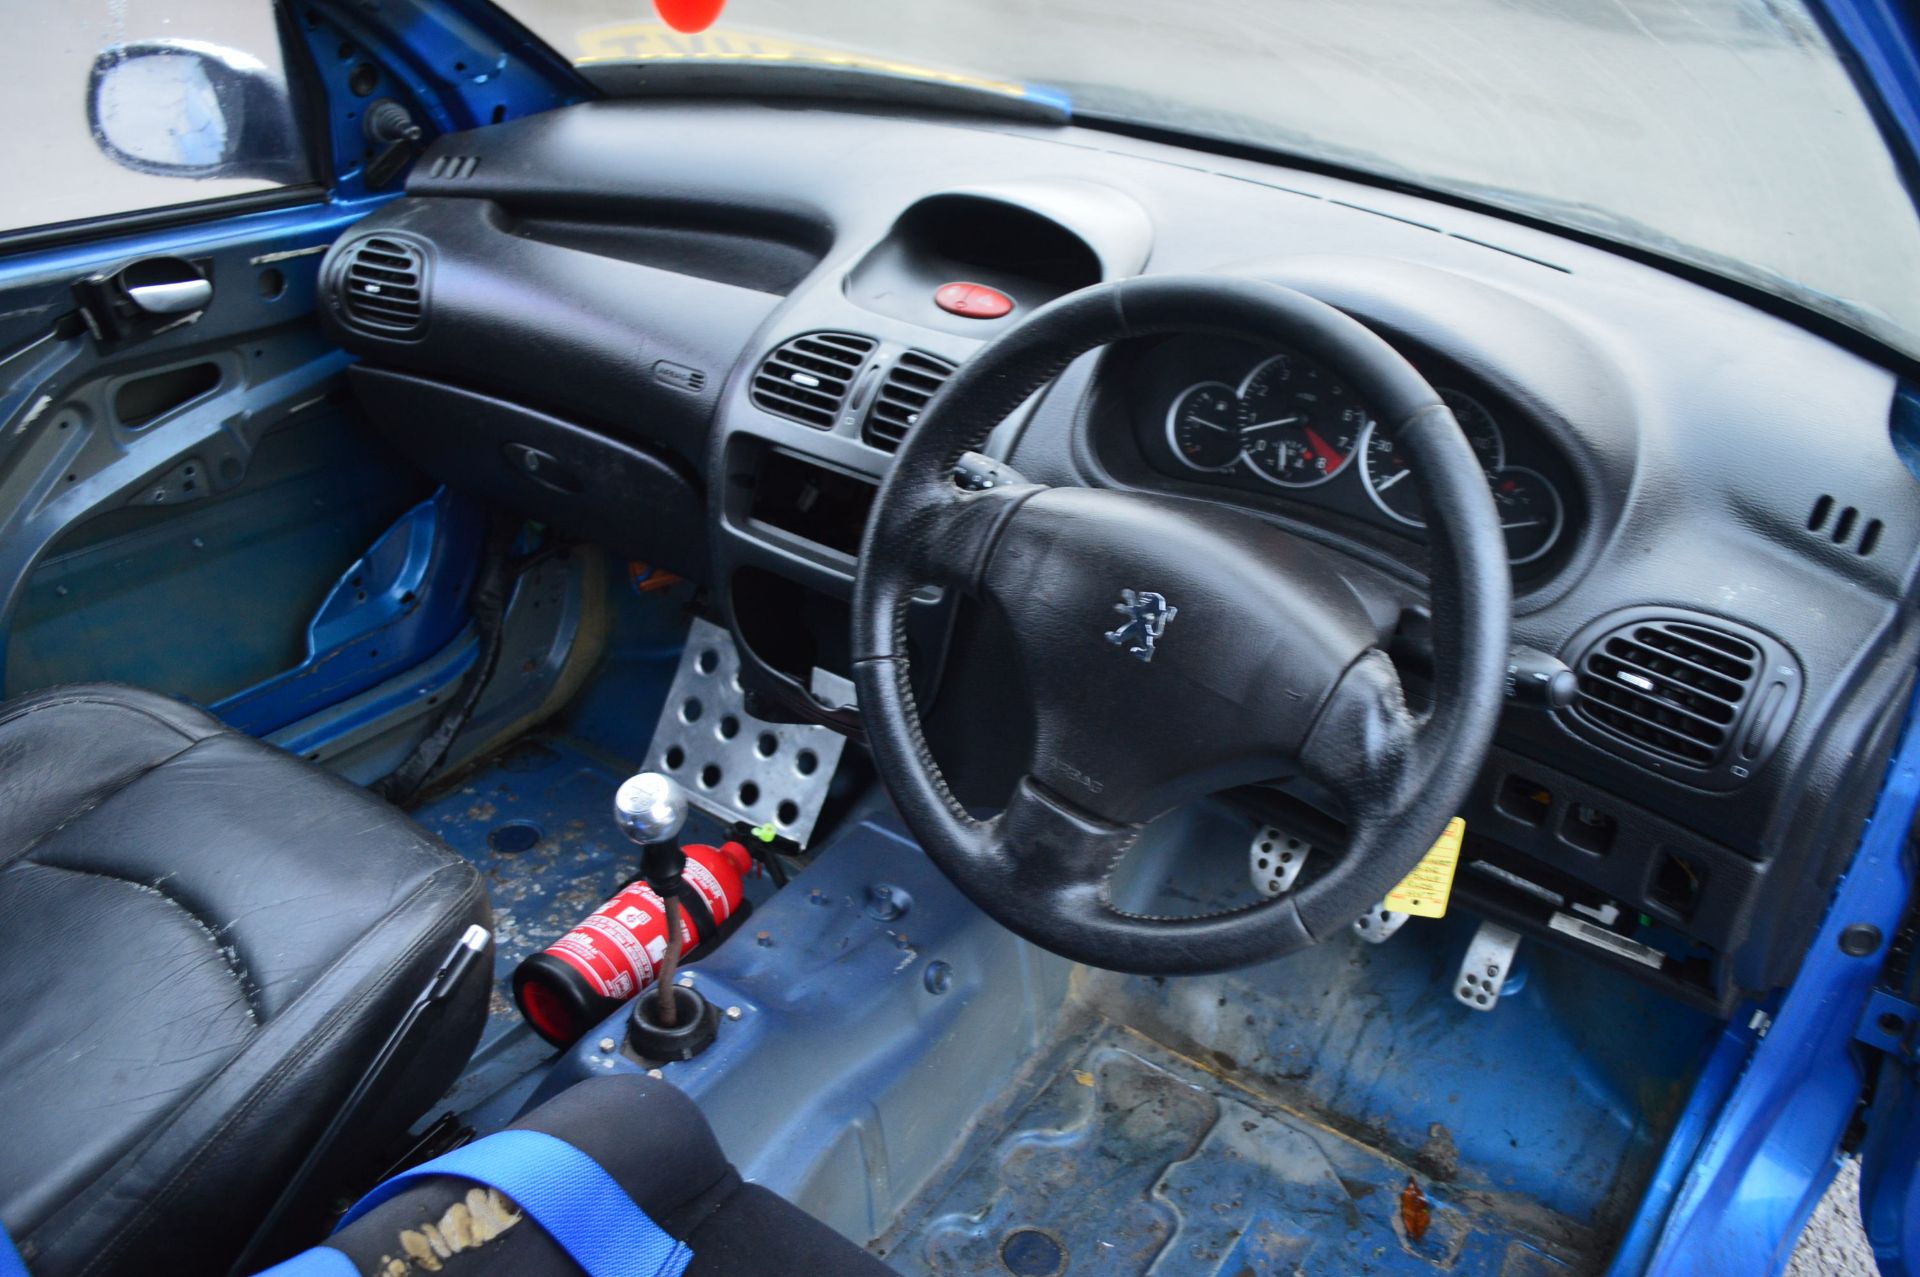 2003/03 REG PEUGEOT 206 GTI 180HP FAST TRACK DAY CAR - Image 13 of 14